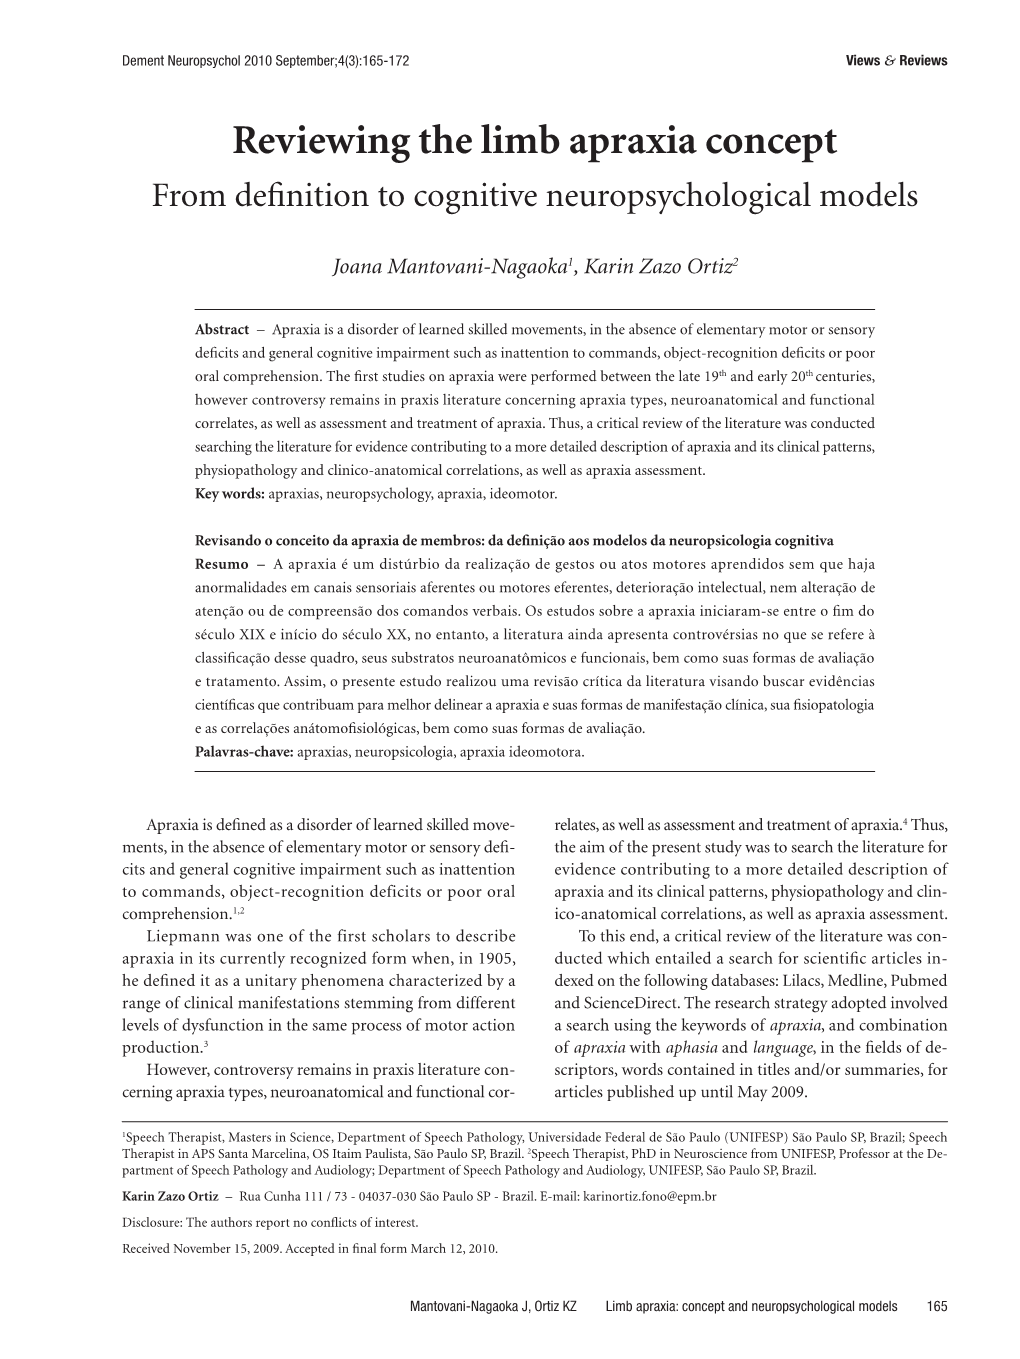 Reviewing the Limb Apraxia Concept from Definition to Cognitive Neuropsychological Models